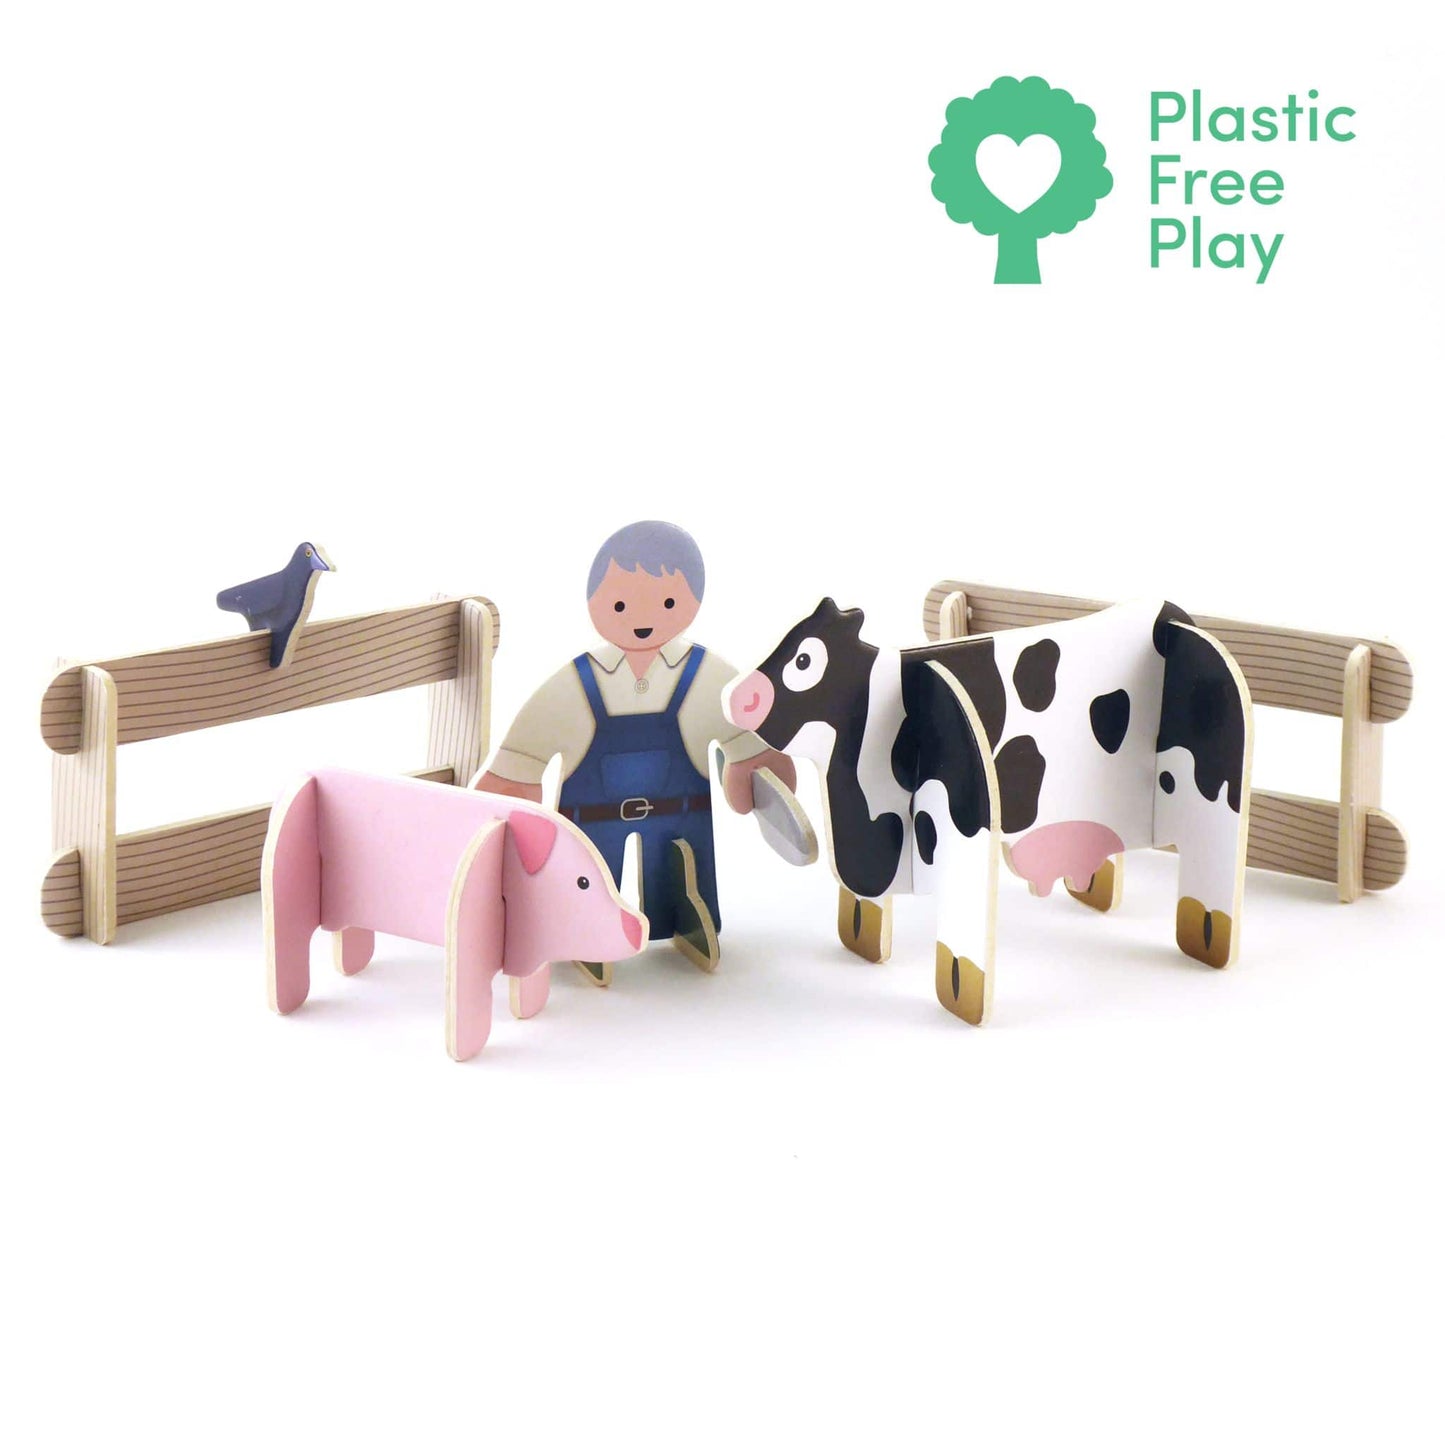 Build and Play Toy Farm Set - farmer and animals